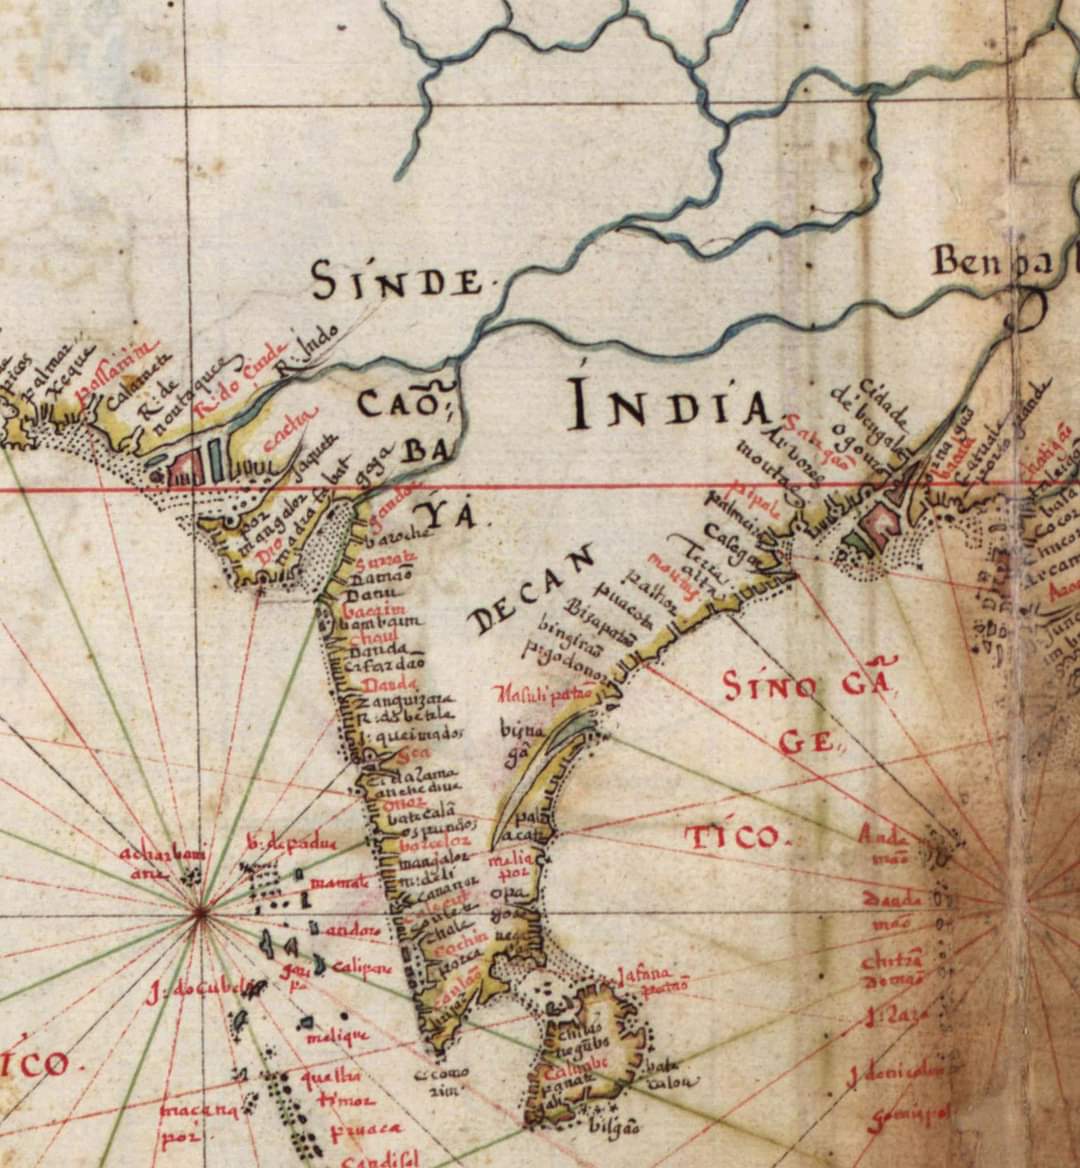 (RE)IMAGINED COMMUNITIES Amazingly important map of South Asia showing Sindh (Pakistan), Bengal (Bangladesh) as distinct geographical territories than India and Deccan (Republic of India). Detail of India, from a 1630 Portuguese map of Asia, #BangladeshIndependenceDay 🇧🇩